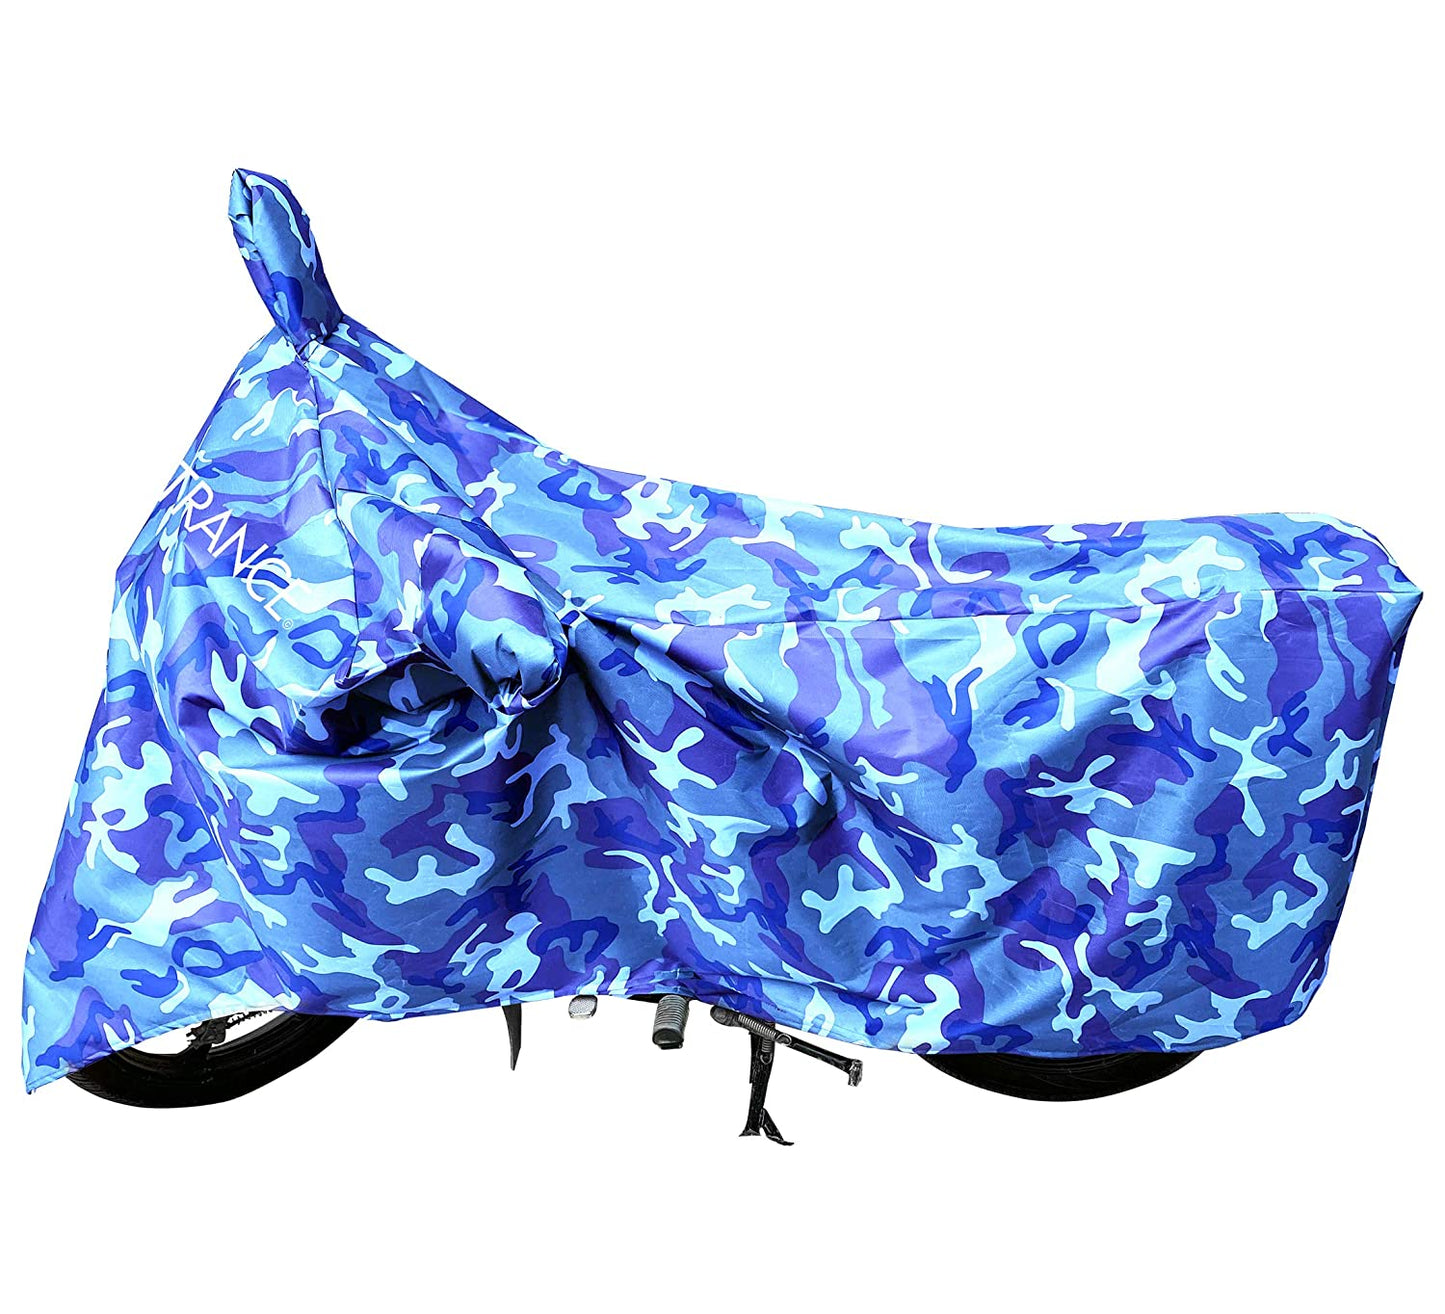 MotoTrance Jungle Bike Body Covers For Royal Enfield Continental GT 650 2018 - Interlock-Stitched Waterproof and Heat Resistant with Mirror Pockets